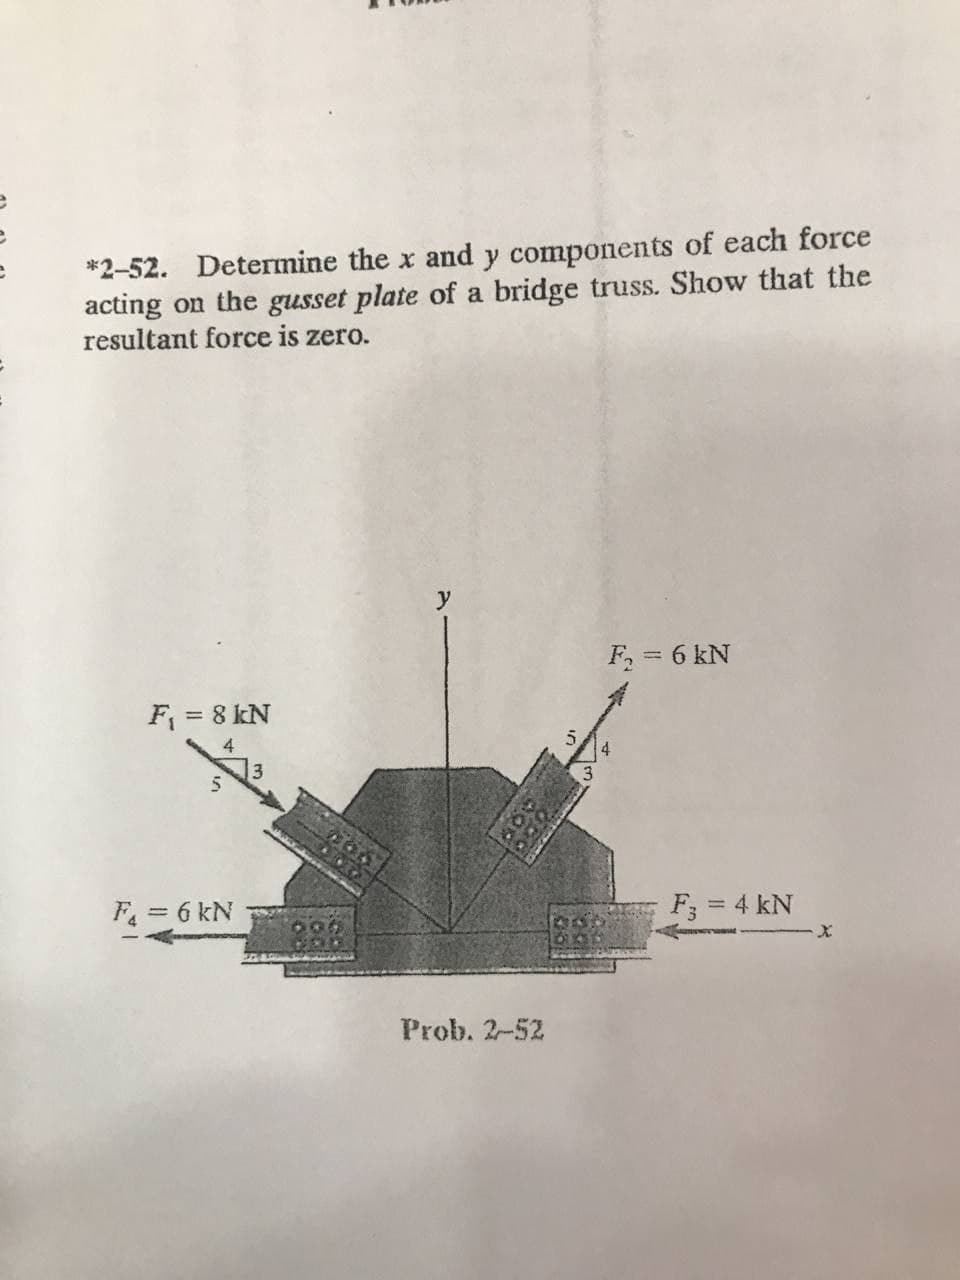 *2-52. Determine the x and y components of each force
acting on the gusset plate of a bridge truss. Show that the
resultant force is zero.
F = 6 kN
F = 8 kN
4.
F = 6 kN
F; = 4 kN
Prob. 2-52
